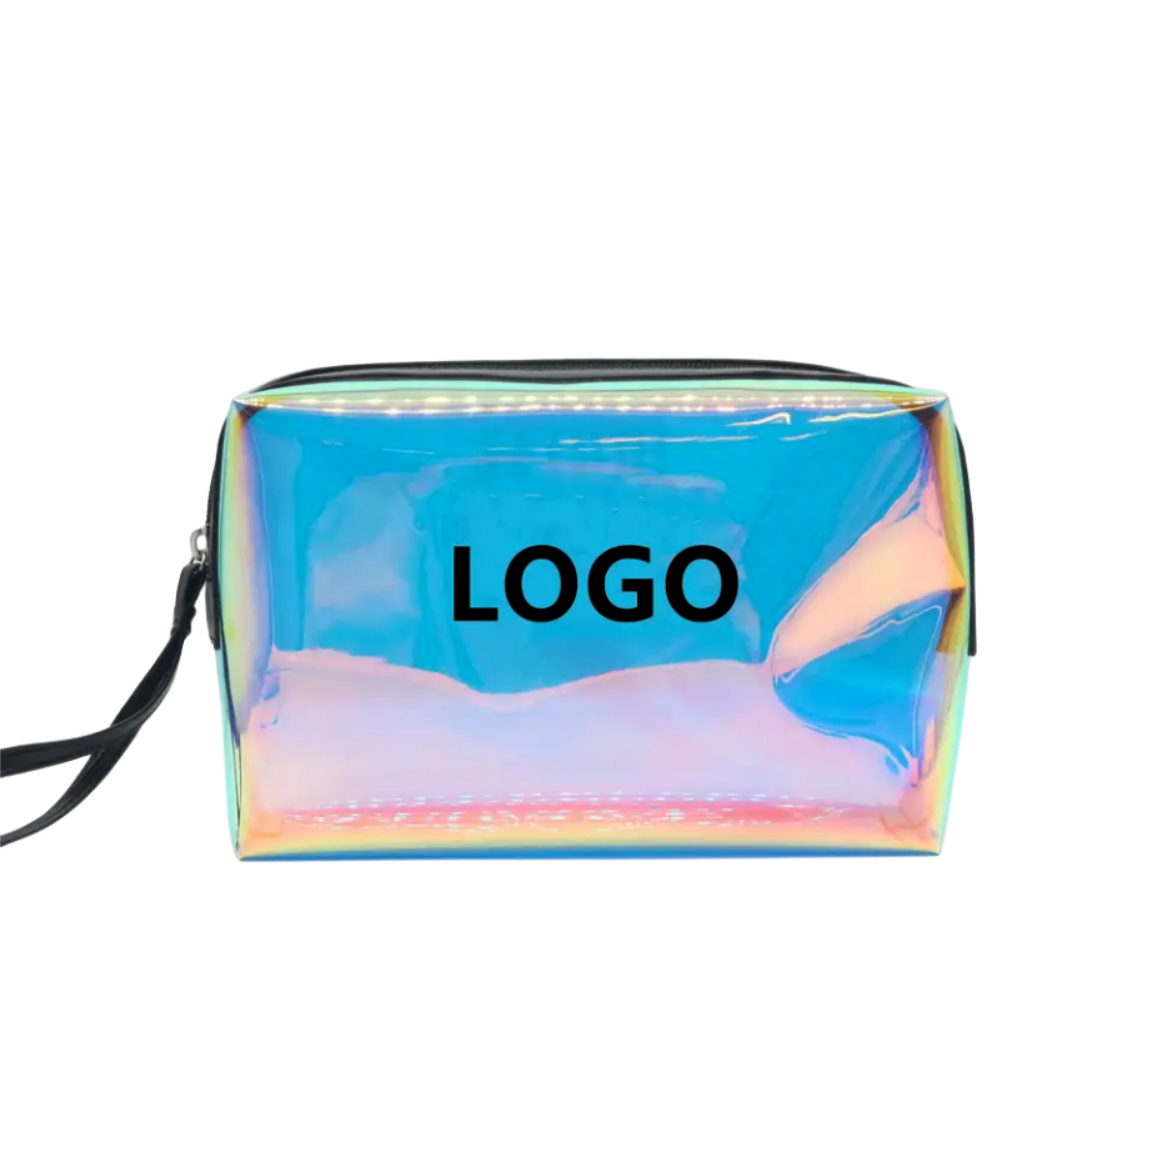 Fashion Holographic PVC Waterproof Toiletry Bag Large Size Holographic Transparent TPU Wristlet Pouch Unisex Travel Cosmetic Bag